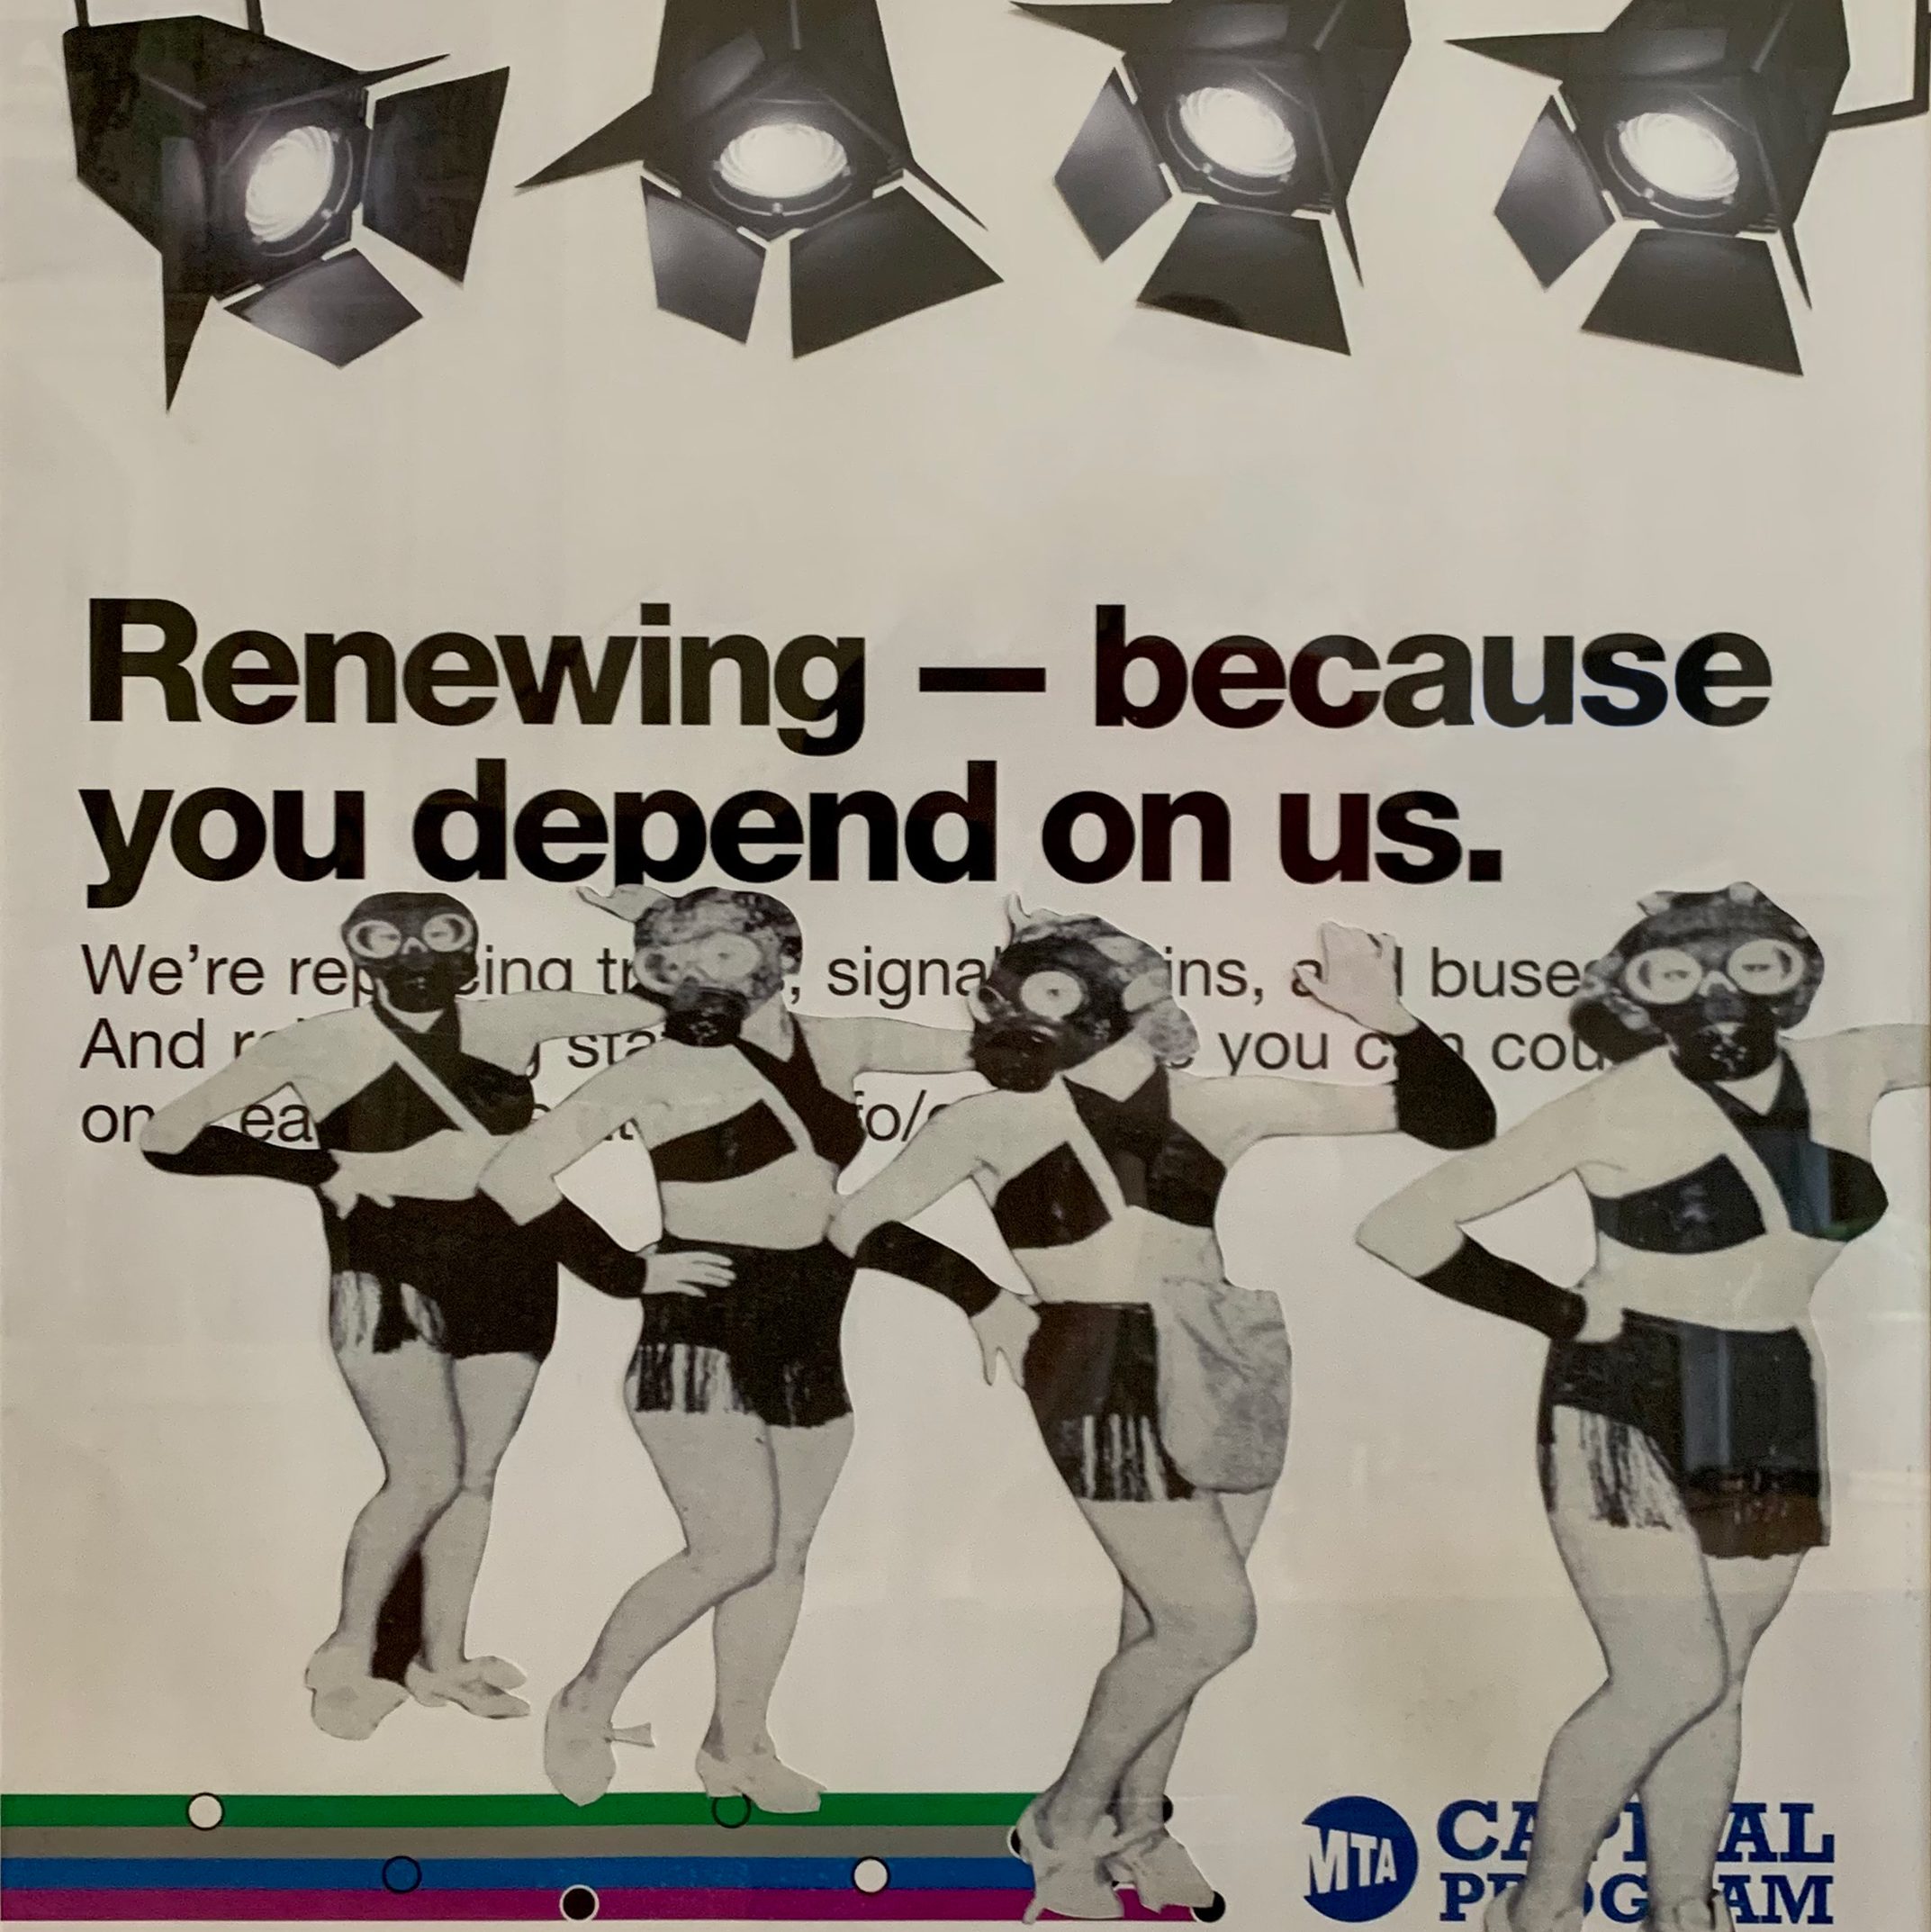 A poster image of a group of women dancing in front of an MTA notice